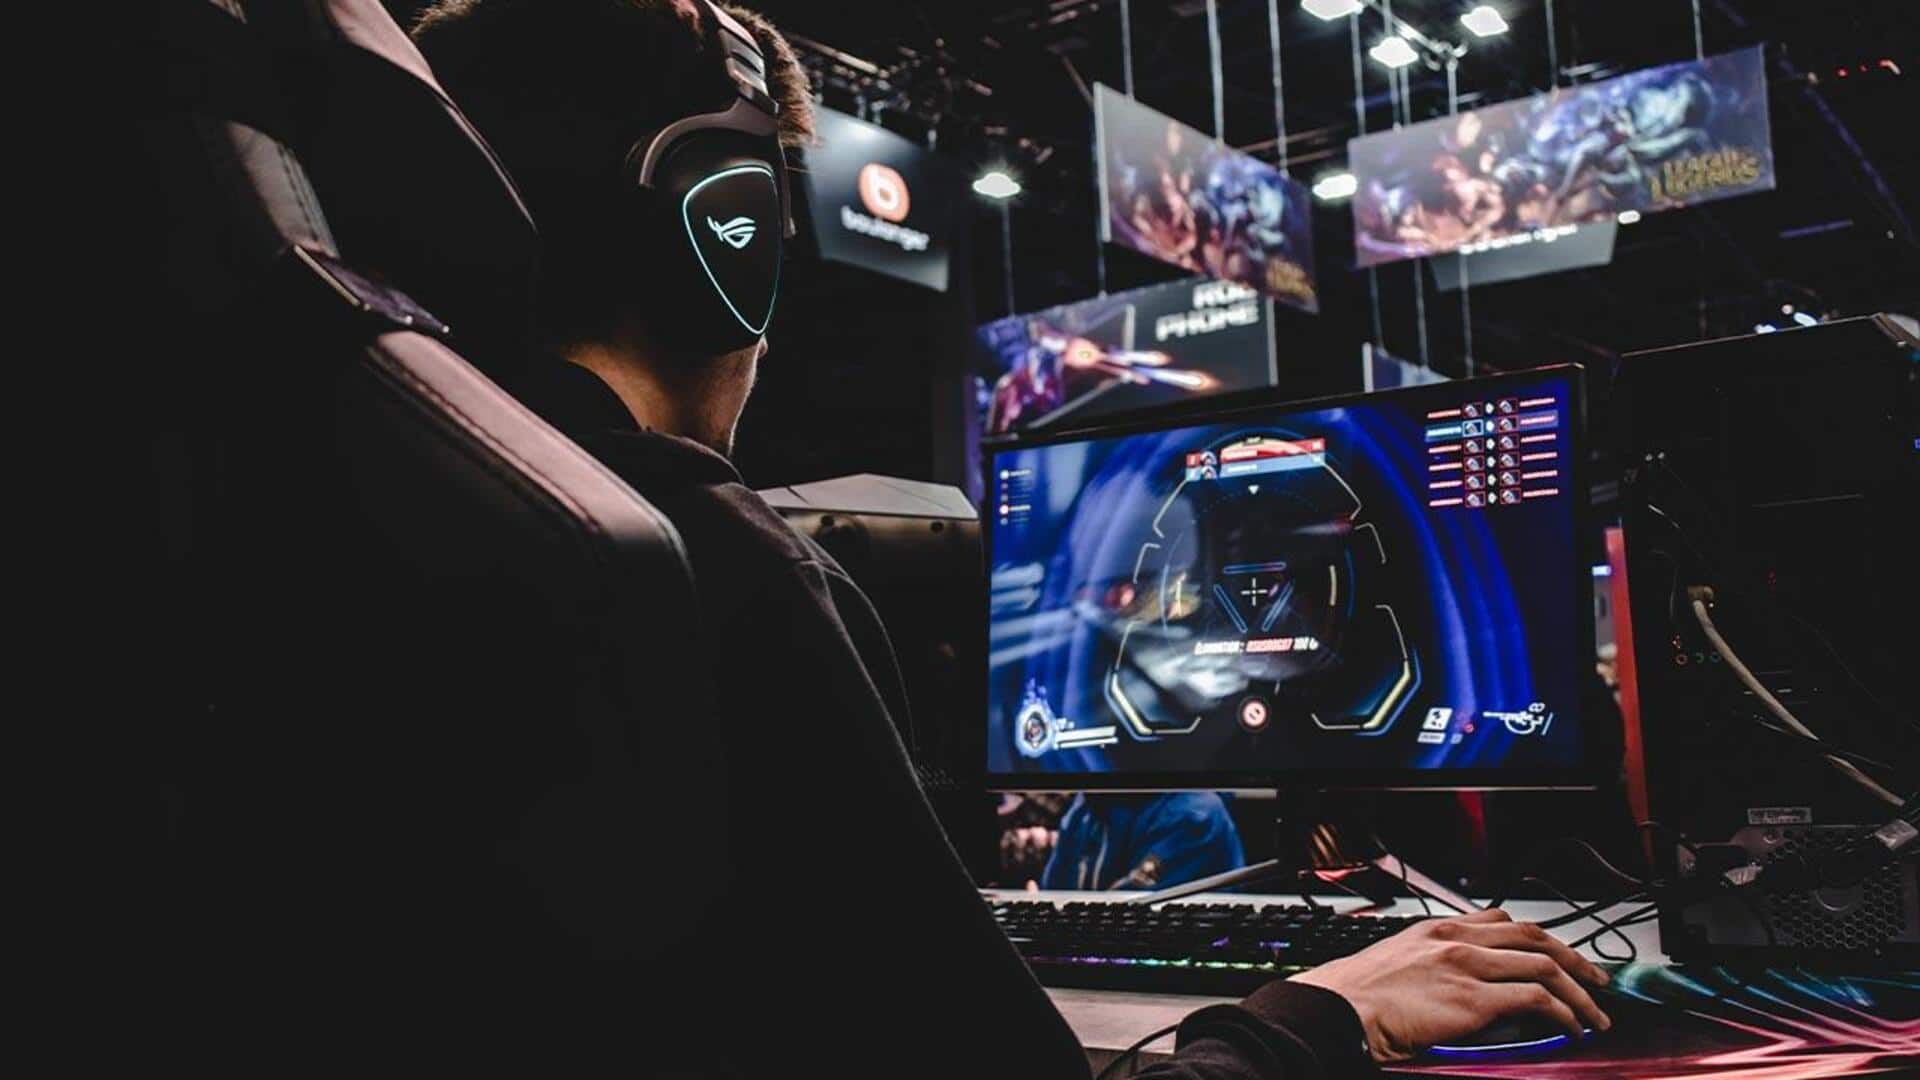 Indian VC firm launches ₹350cr fund for boosting e-sports ecosystem